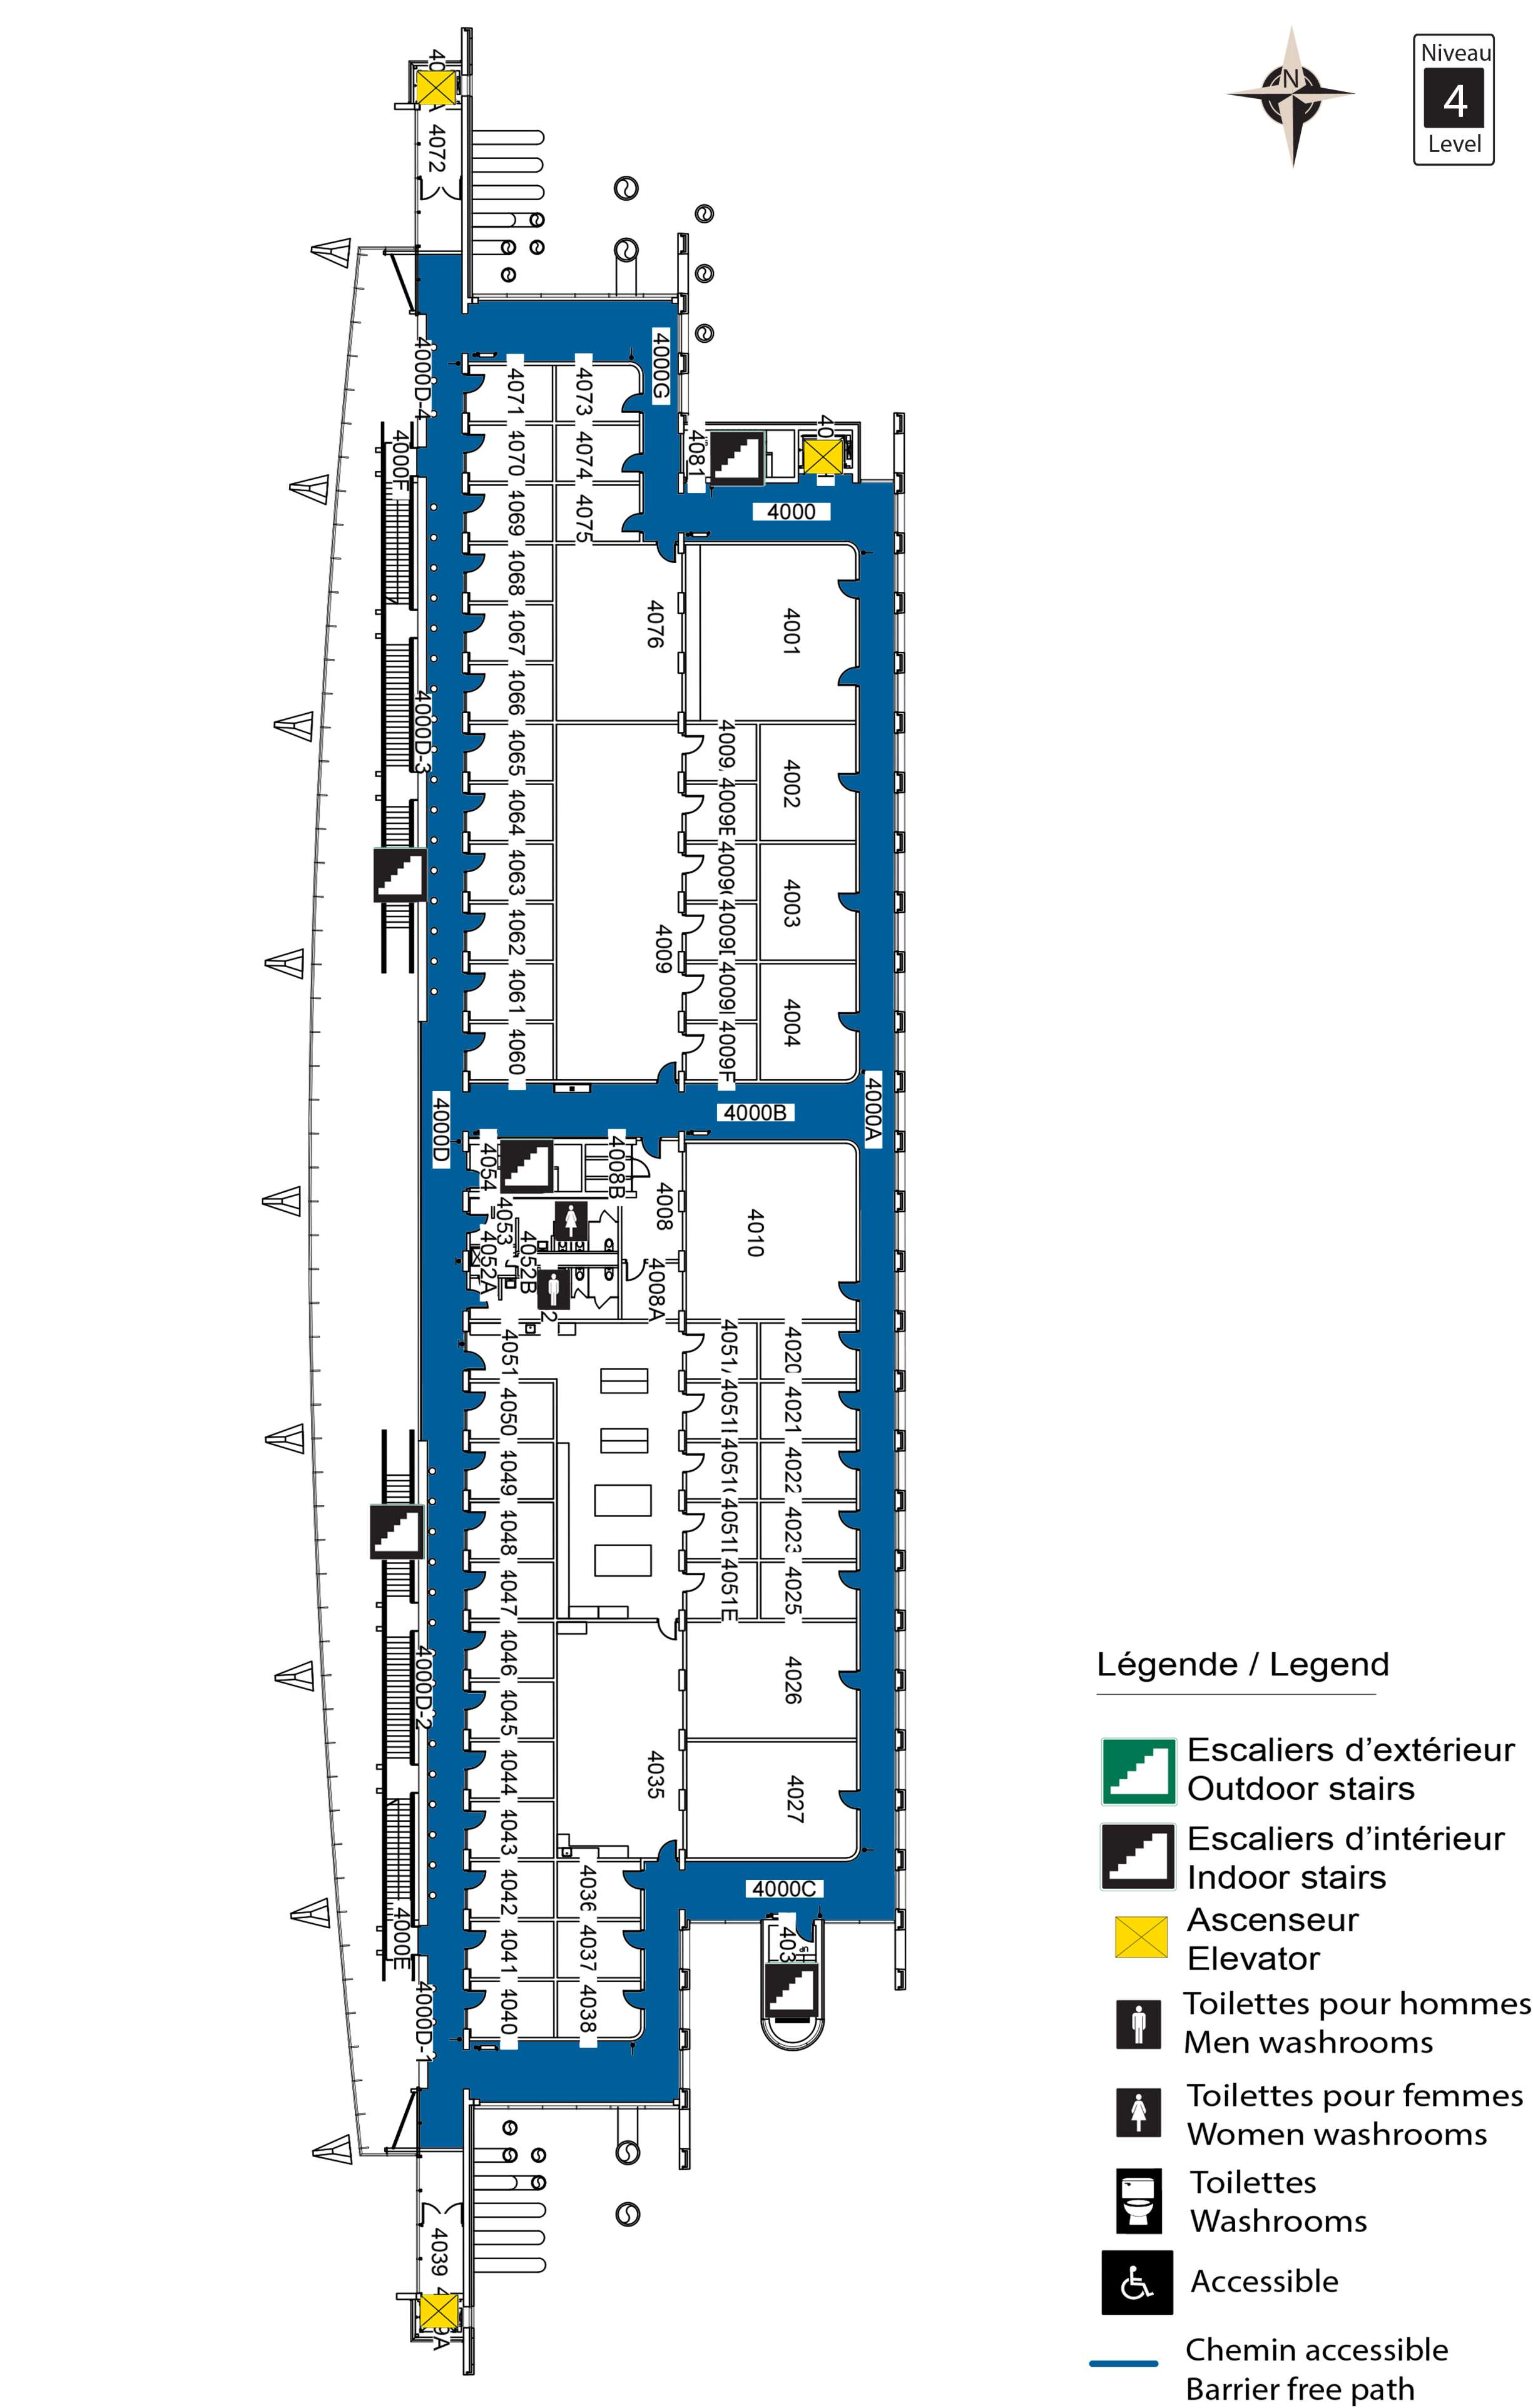 Accessible map of STE level 4